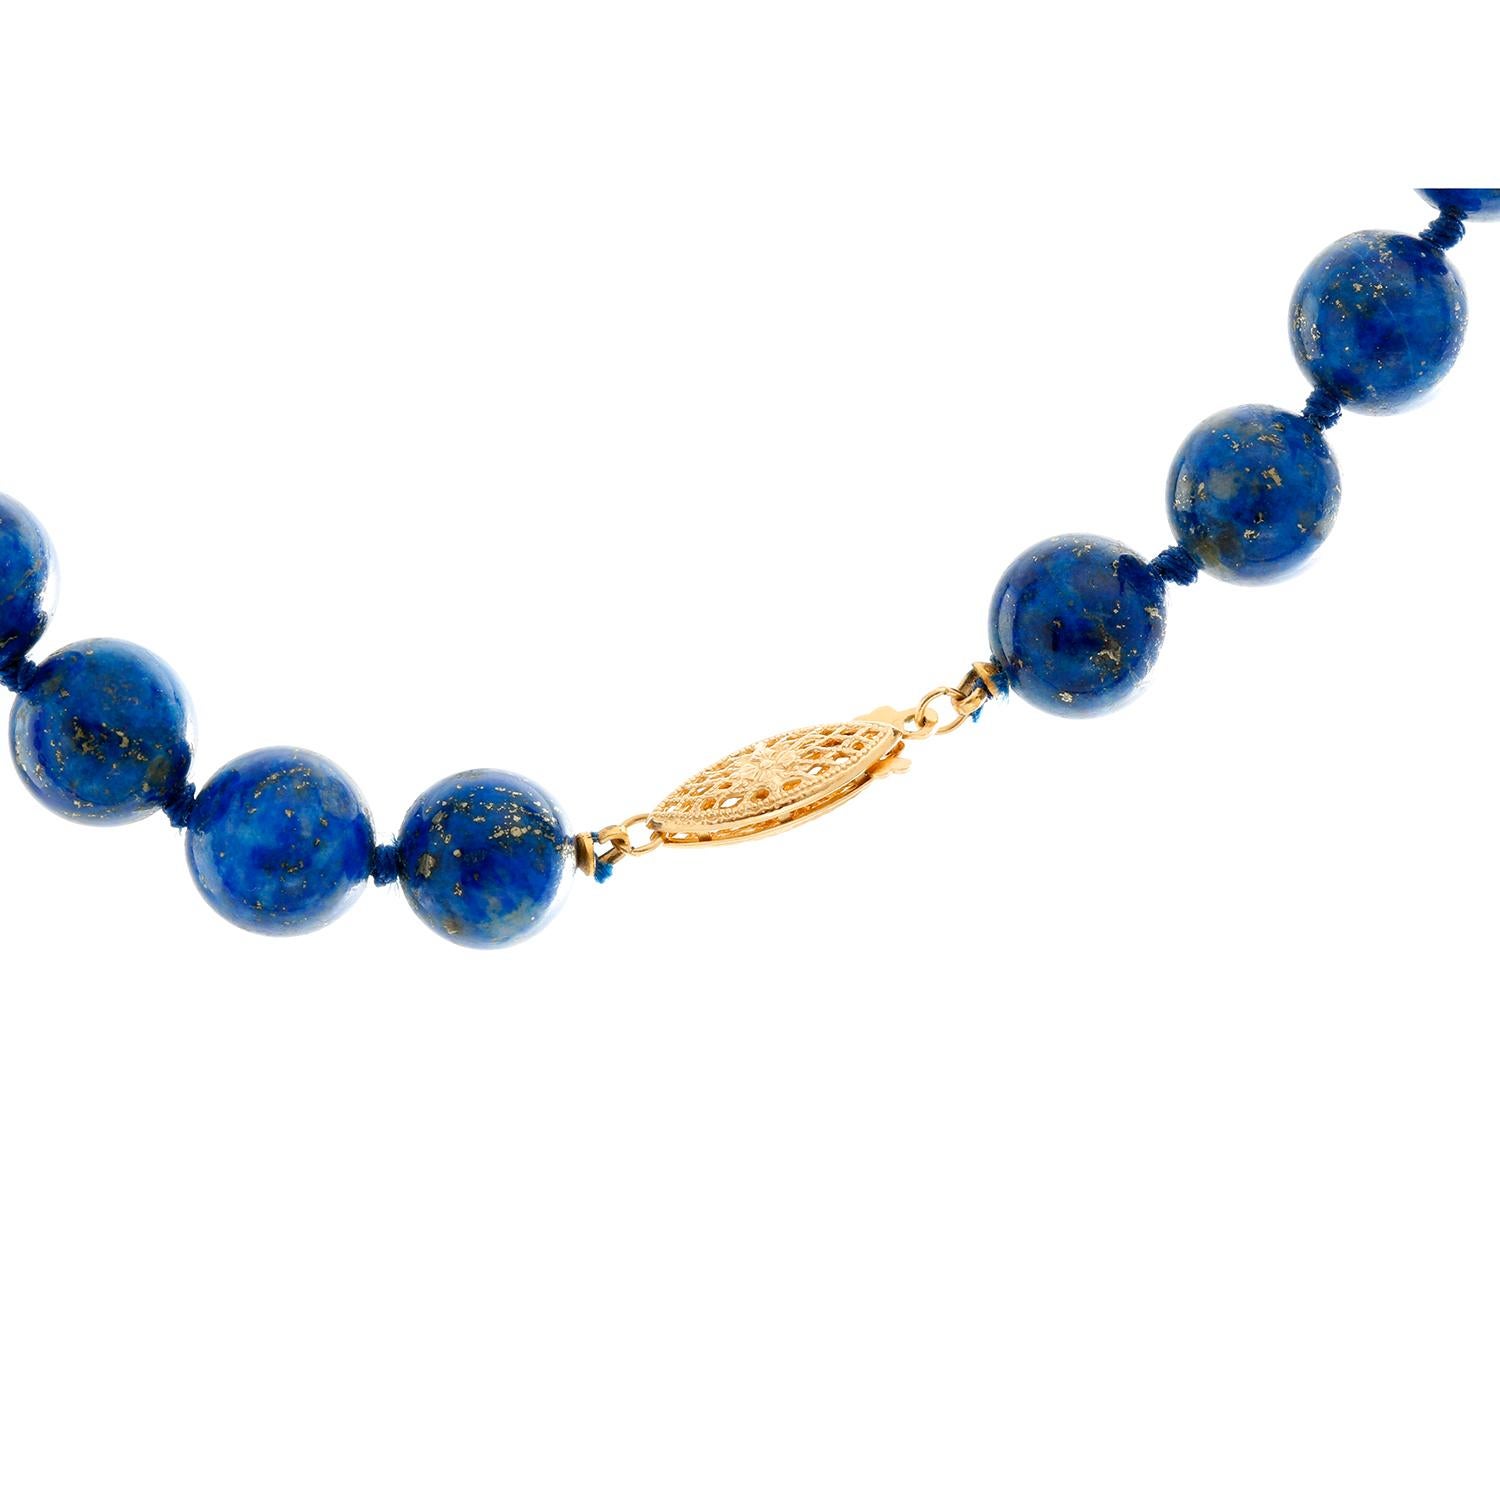 14K Yellow Gold Lapis Lazuli Beaded 30 inch Necklace - Beautiful 6mm beads of Lapis Lazuli with 14K yellow gold beads. Total weight 38 grams. Total length 30 inches .